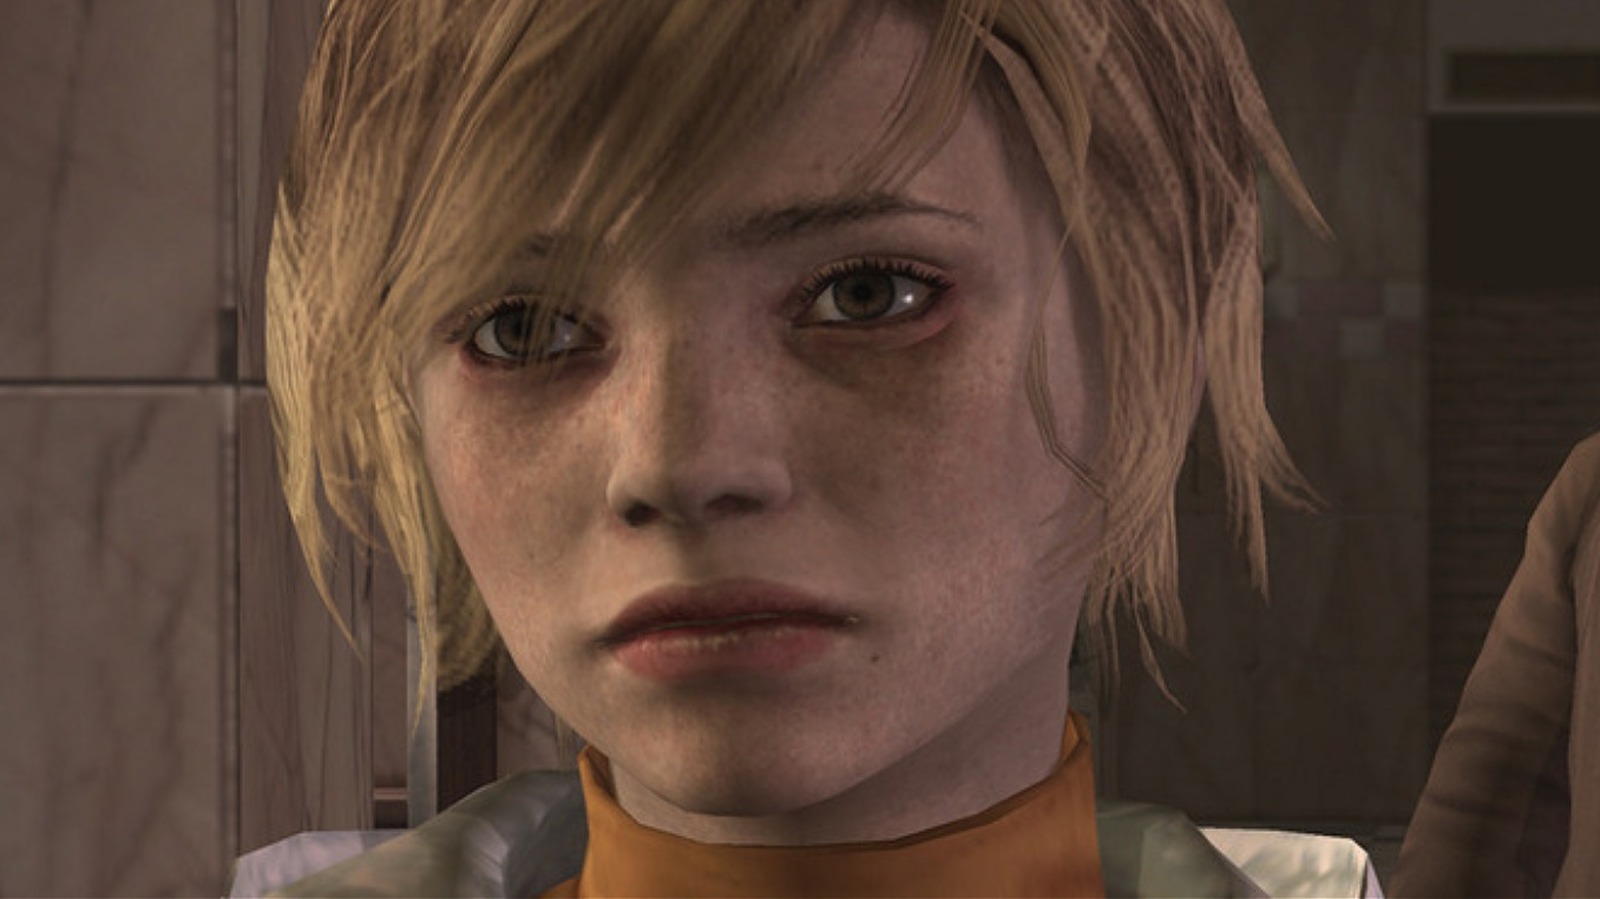 Konami seems to have leaked its own Silent Hill 2 remake